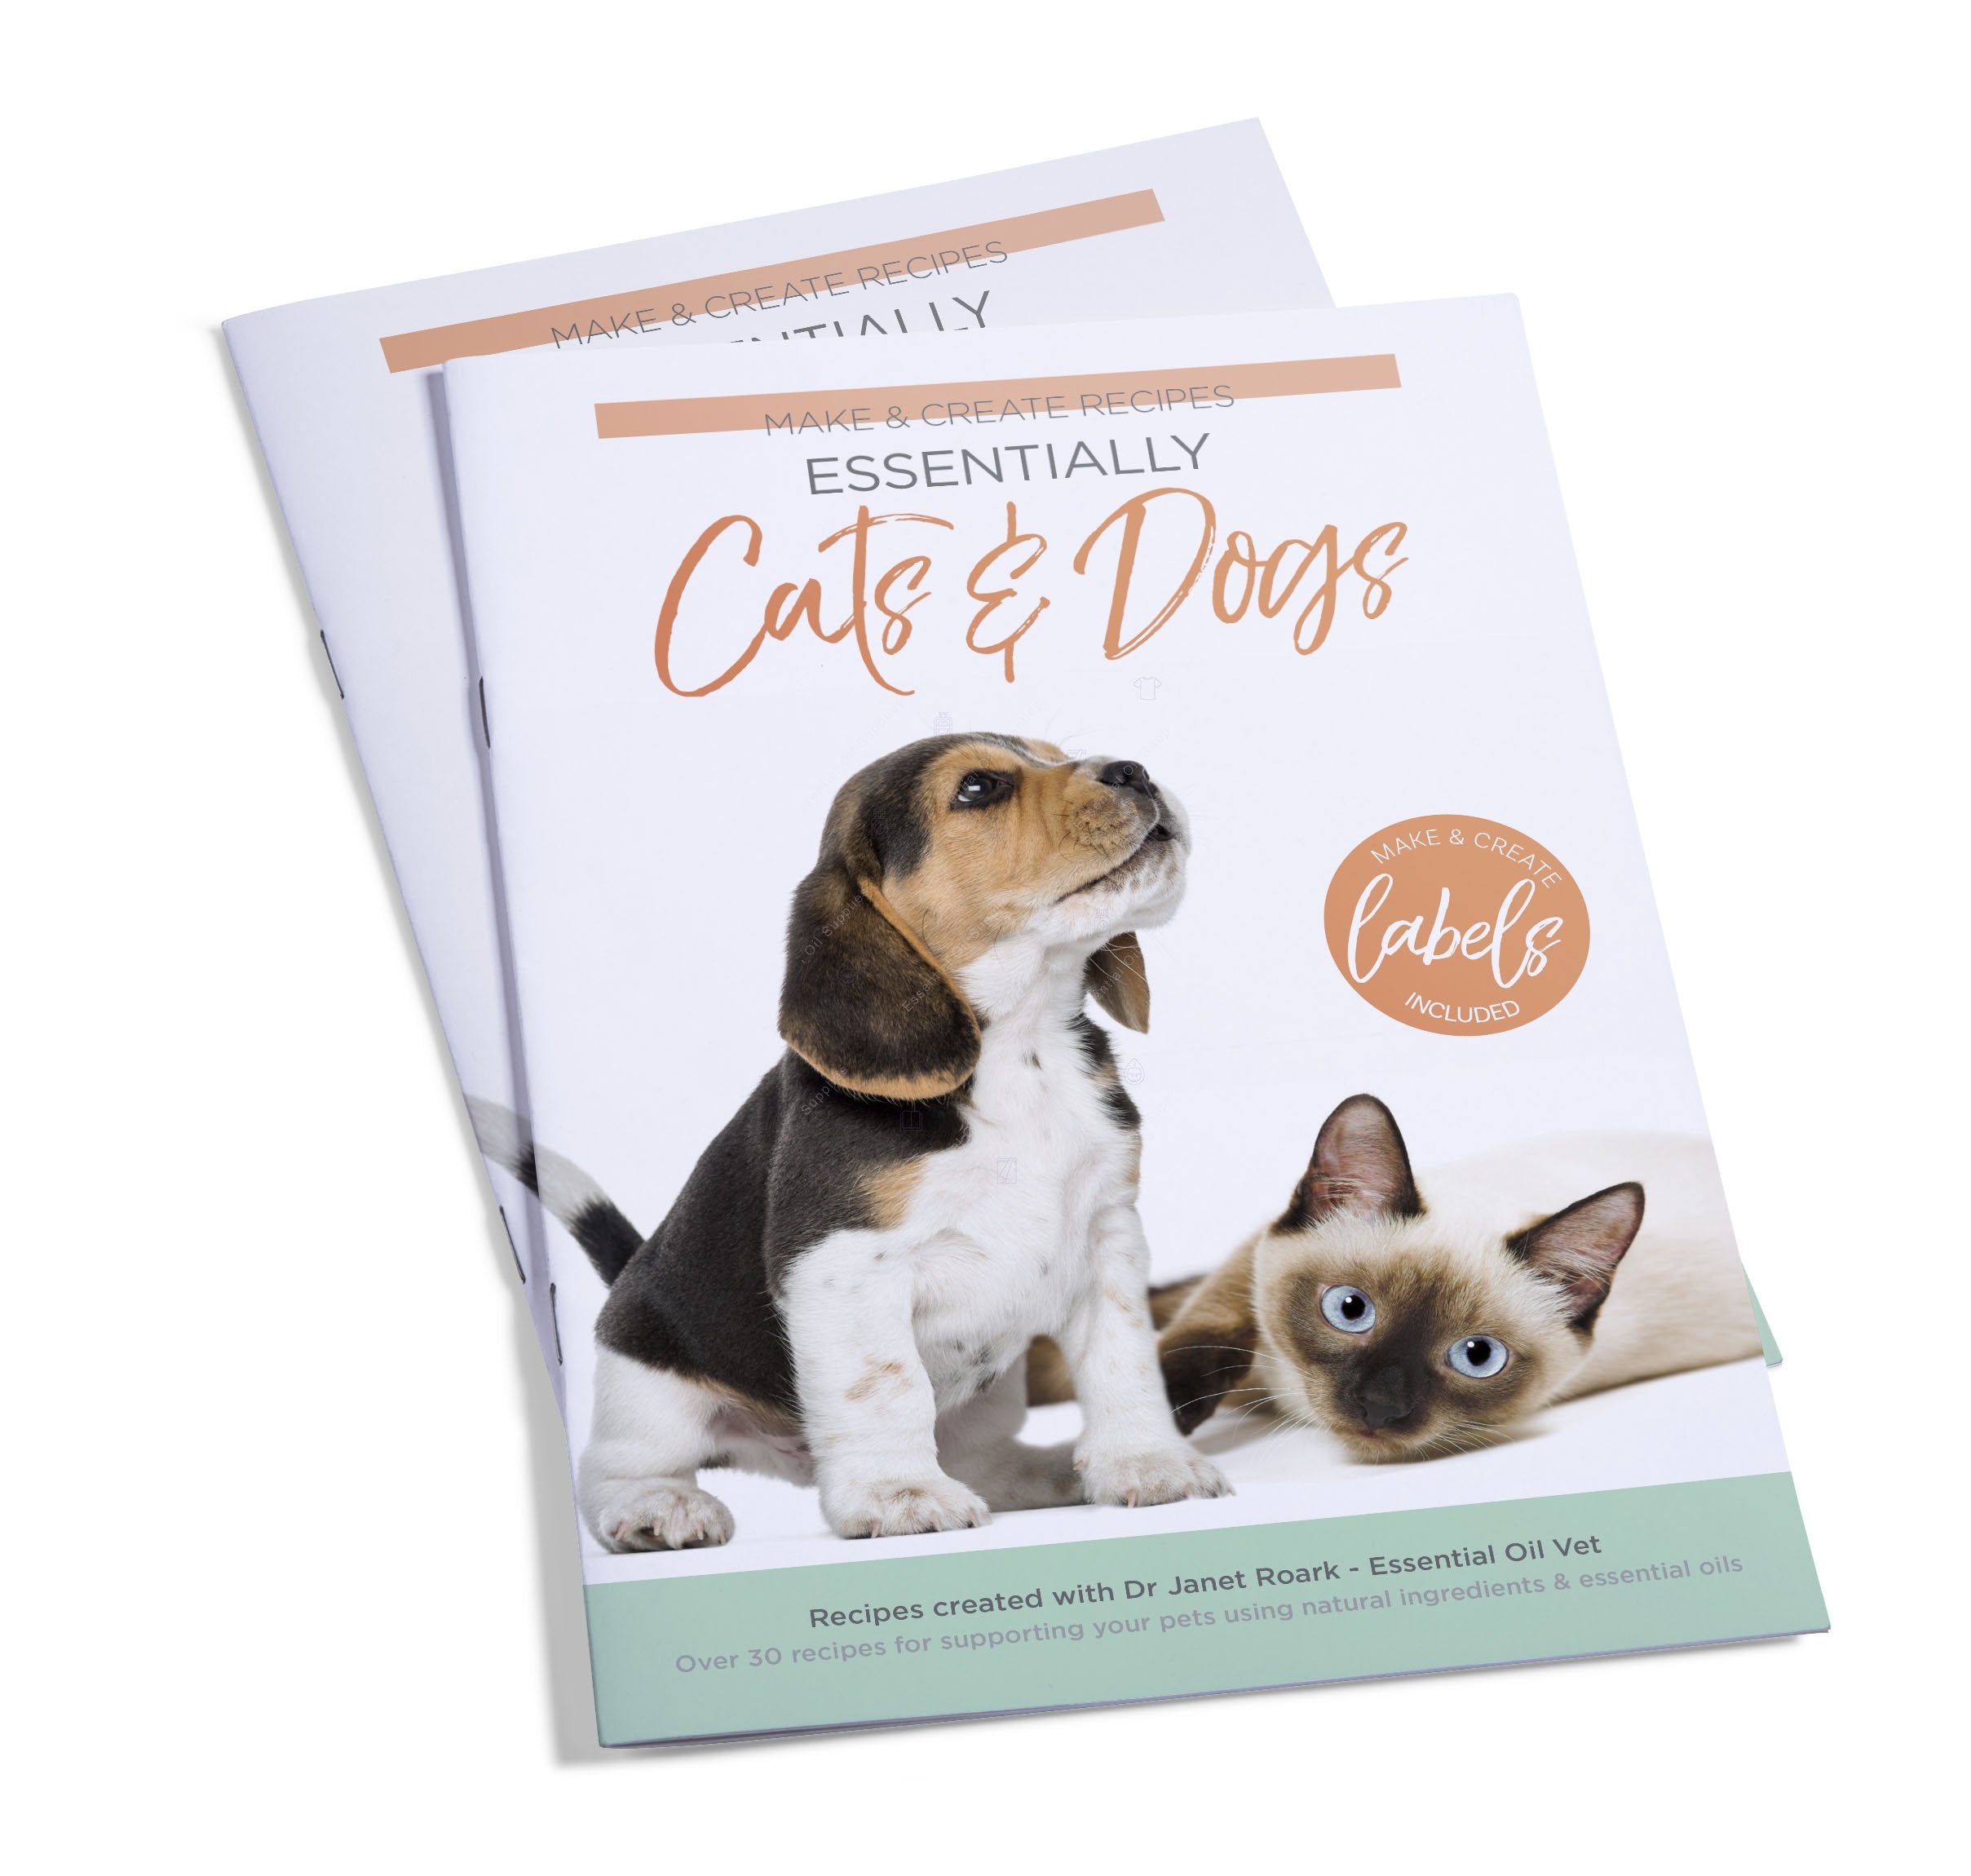 Essentially Cats & Dogs : Make & Create Recipes (includes over 40 labels) with Dr Janet Roark